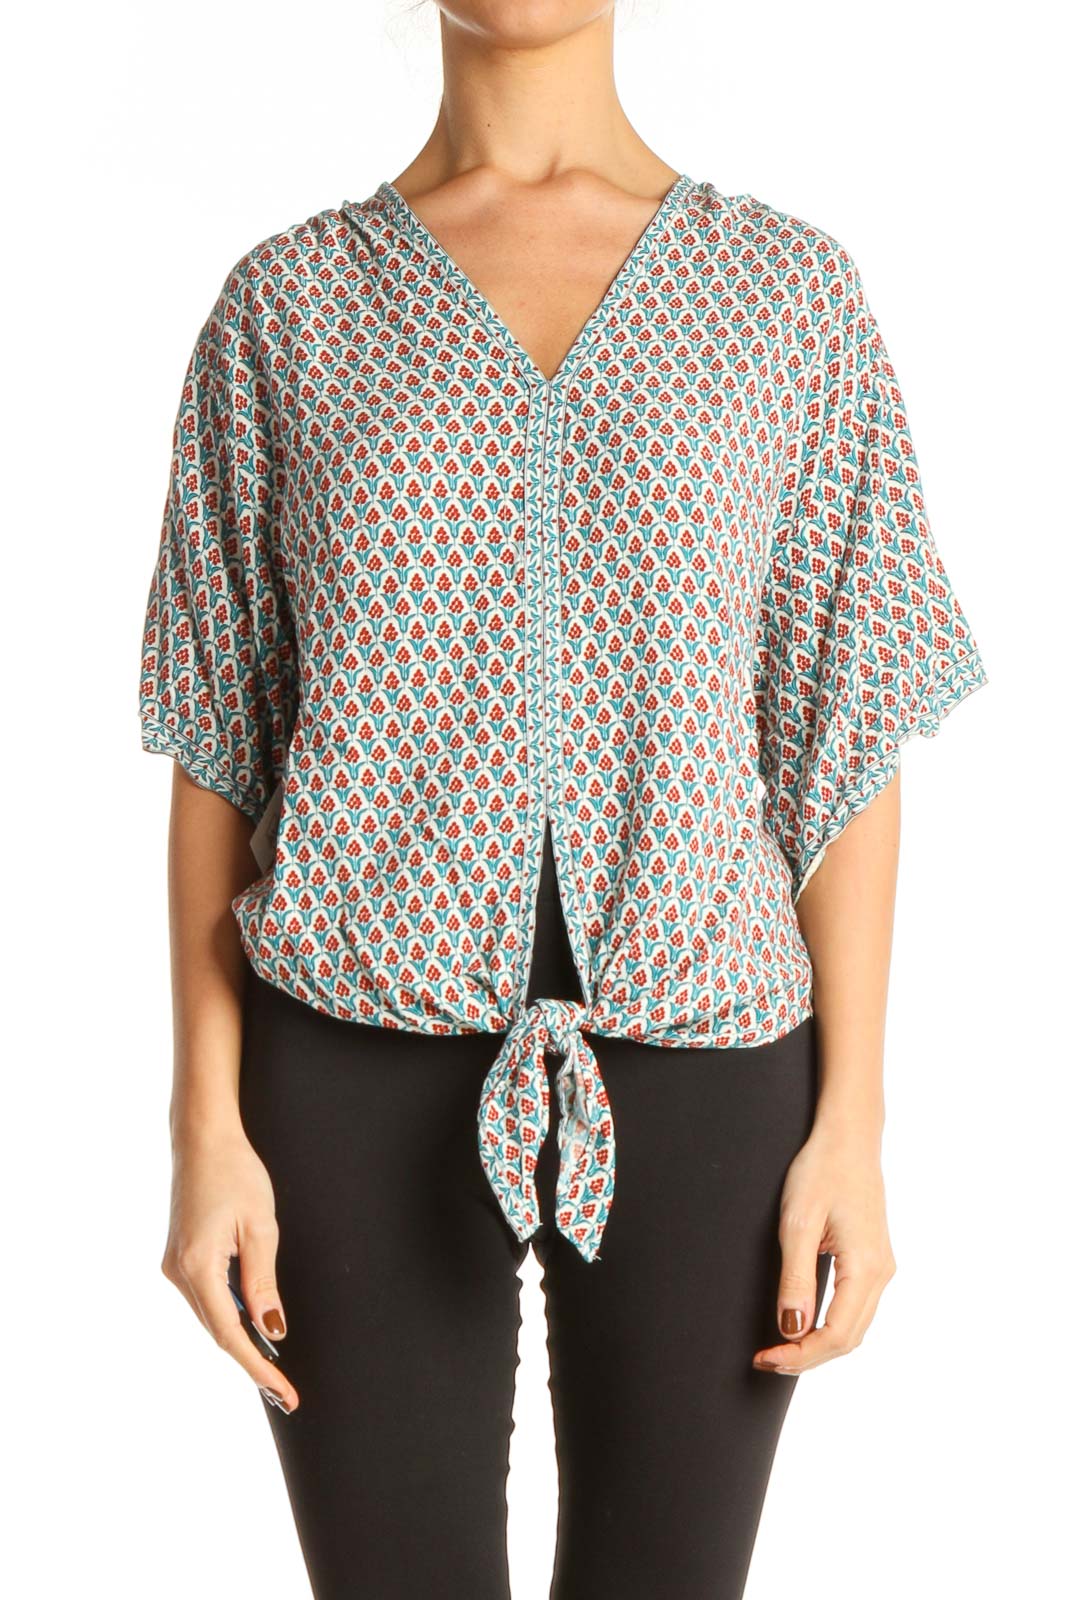 Blue Printed Casual Blouse Front